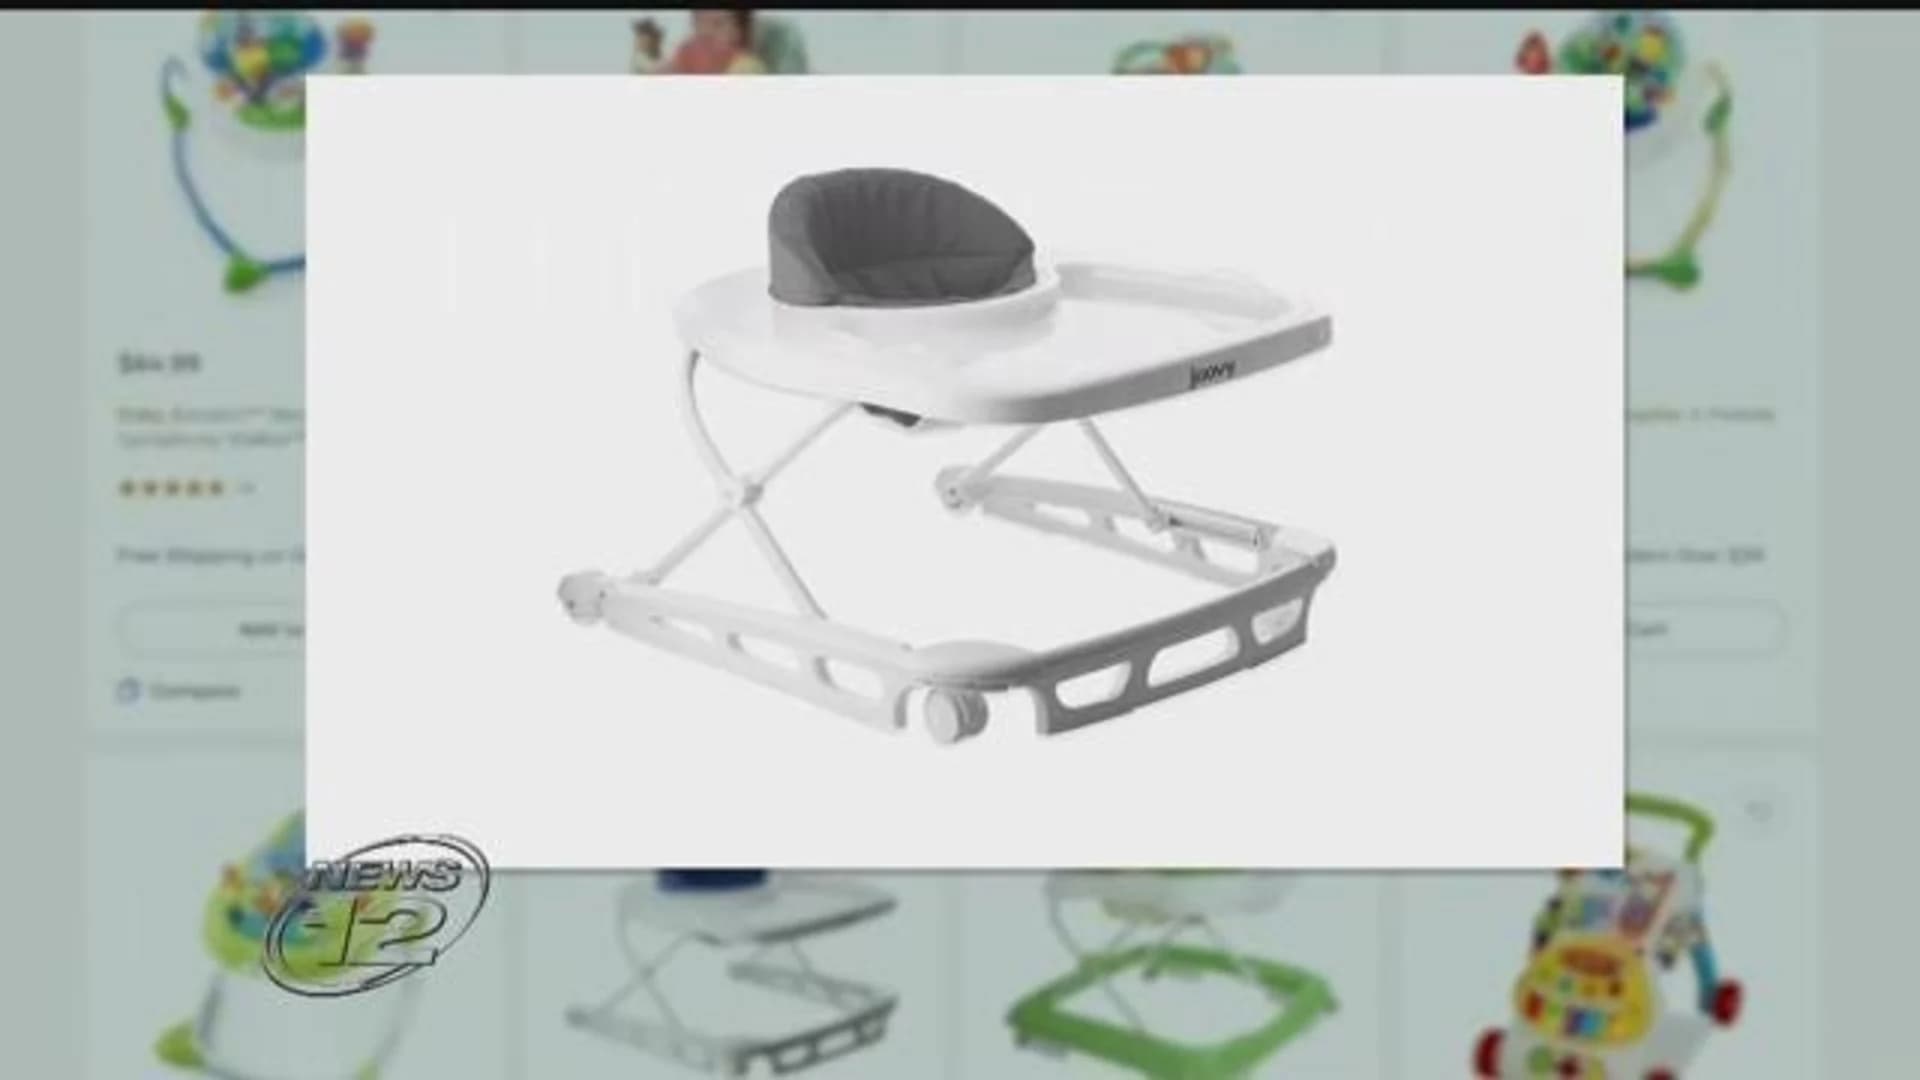 State lawmaker wants to ban baby walkers in New Jersey; calls them ‘dangerous’